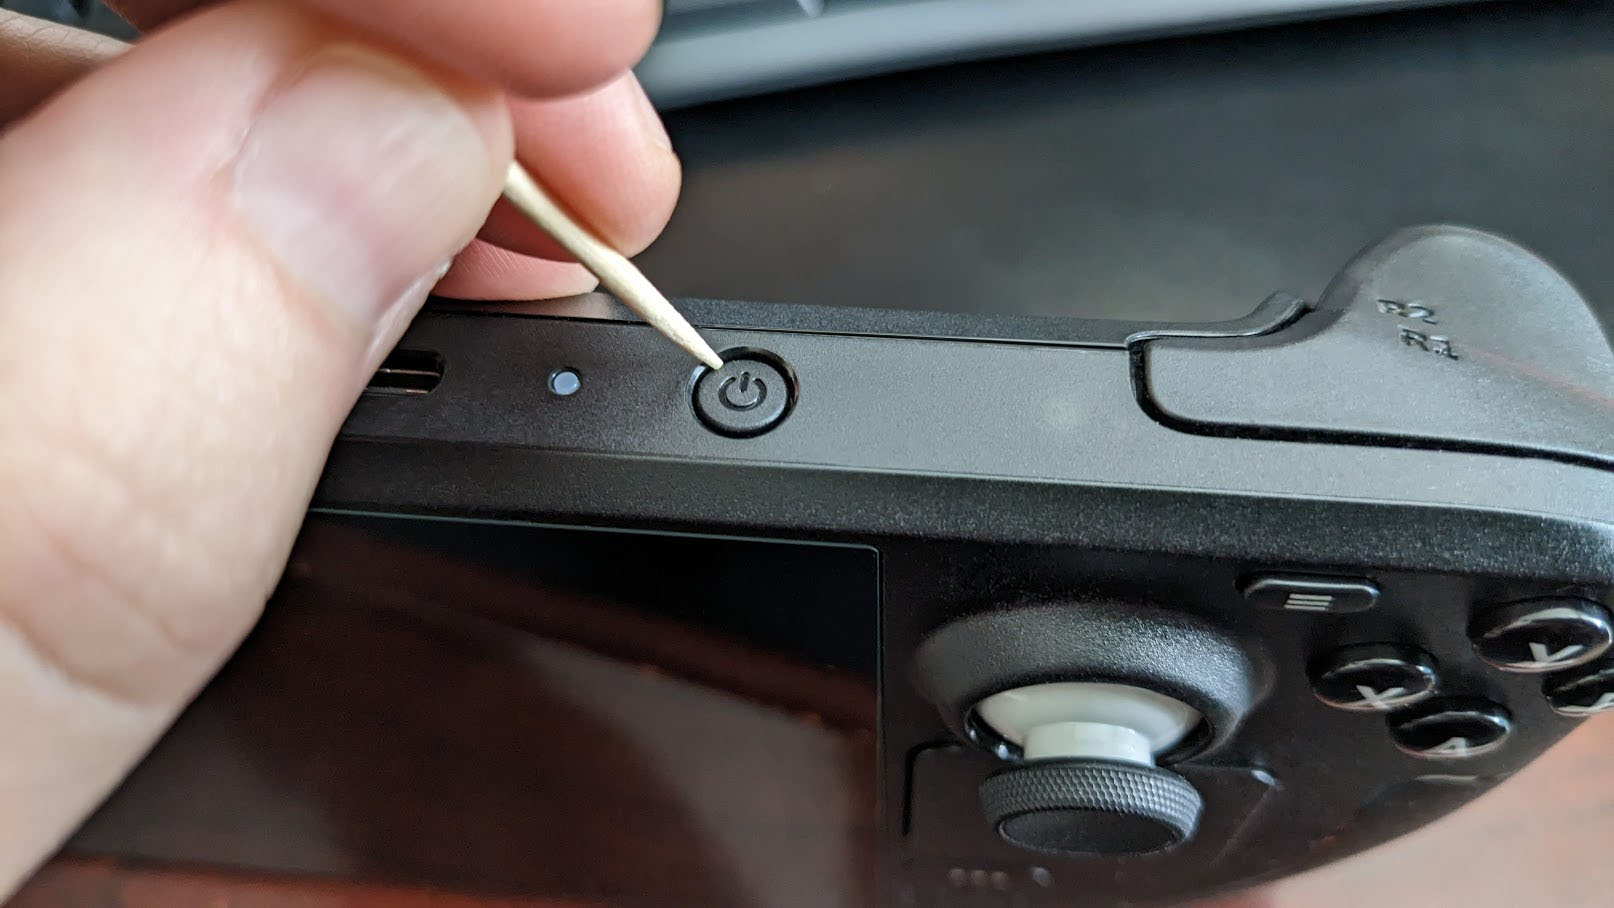 Using a toothpick on the Steam Deck power button.